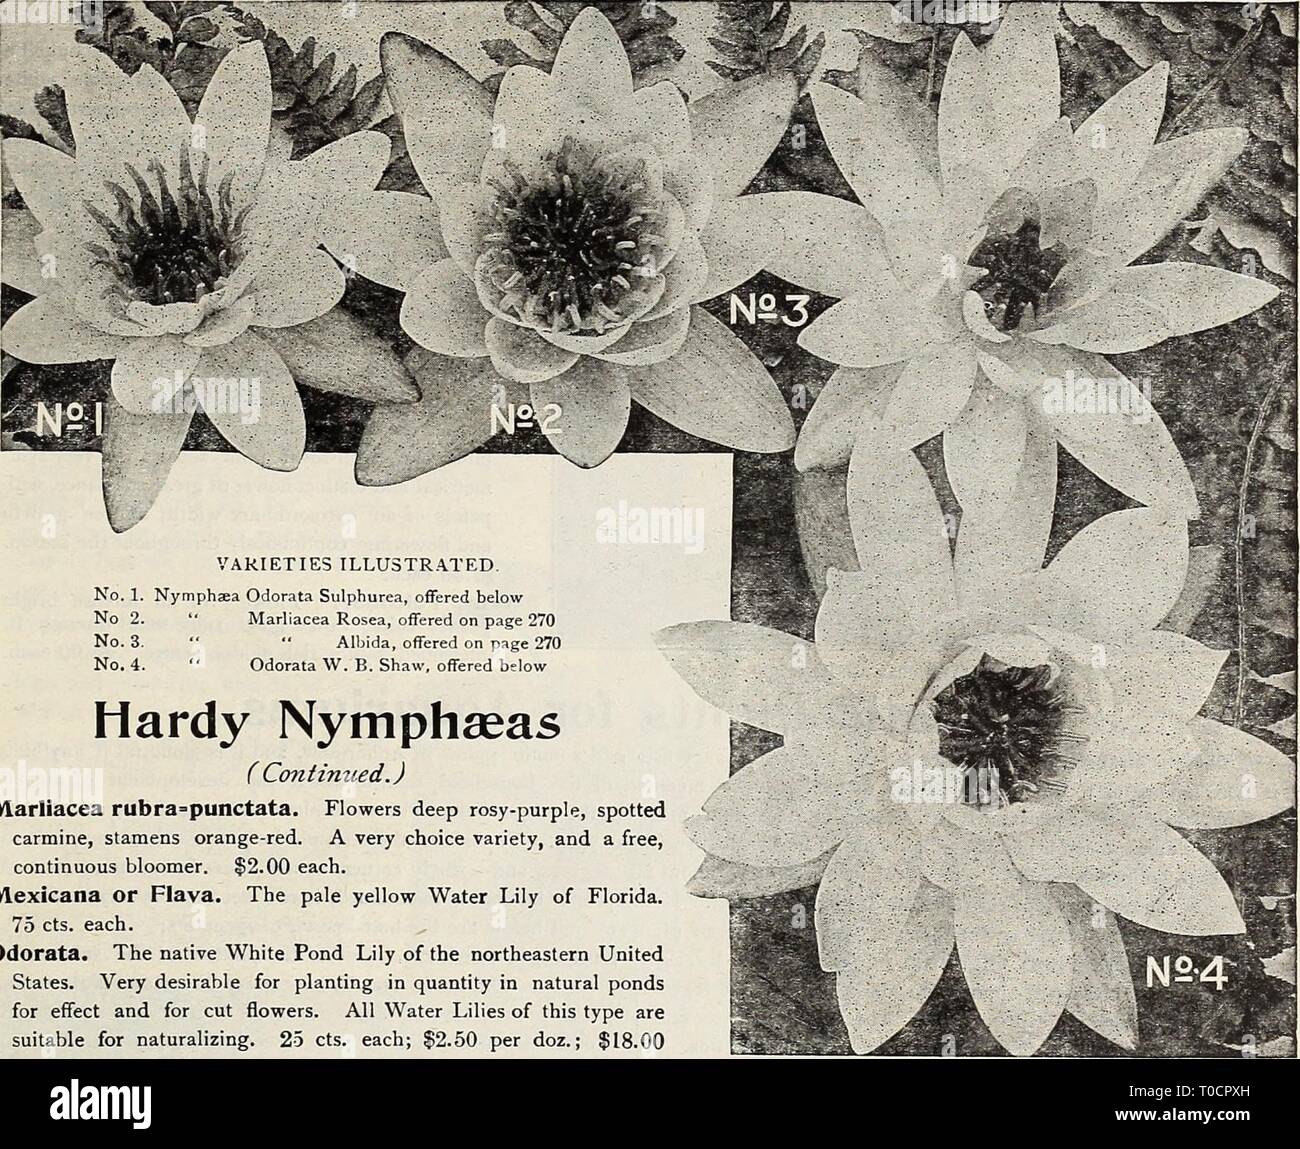 Dreer's garden book 1917 (1917) Dreer's garden book 1917 dreersgardenbook1917henr Year: 1917  HmRTADREER -PnilADtLPHIAfAm WATER LILIES*' AQUATICS- M ™    No. 1. Nymphaea Odorata Sulphurea, offered below No 2. ' Marliacea Rosea, offered on page 270 No. 3. ' •* Albida, offered on page 270 No. 4. ' Odorata W. B. Shaw, offered below Hardy Nymphseas ( Contimied.) Marliacea rubra=punctata. Flowers deep rosy-purple, spotted carmine, stamens orange-red. A very choice variety, and a free, continuous bloomer. $2.00 each. Mexicana or Flava. The pale yellow Water Lily of Florida. 75 cts. each. Odorata. T Stock Photo